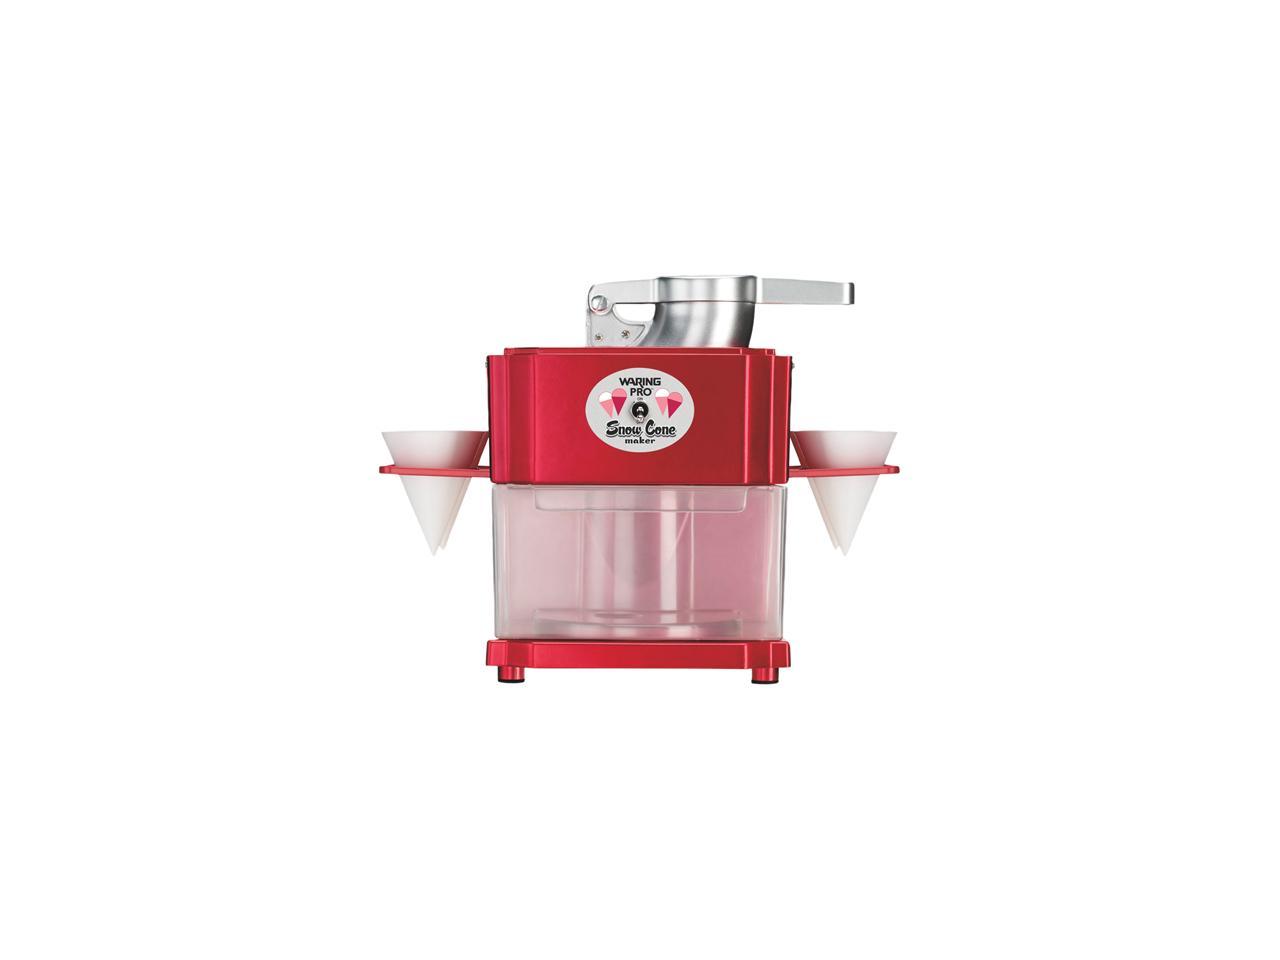 Waring Pro SCM100 Professional Snow Cone Maker Metallic Red for sale online